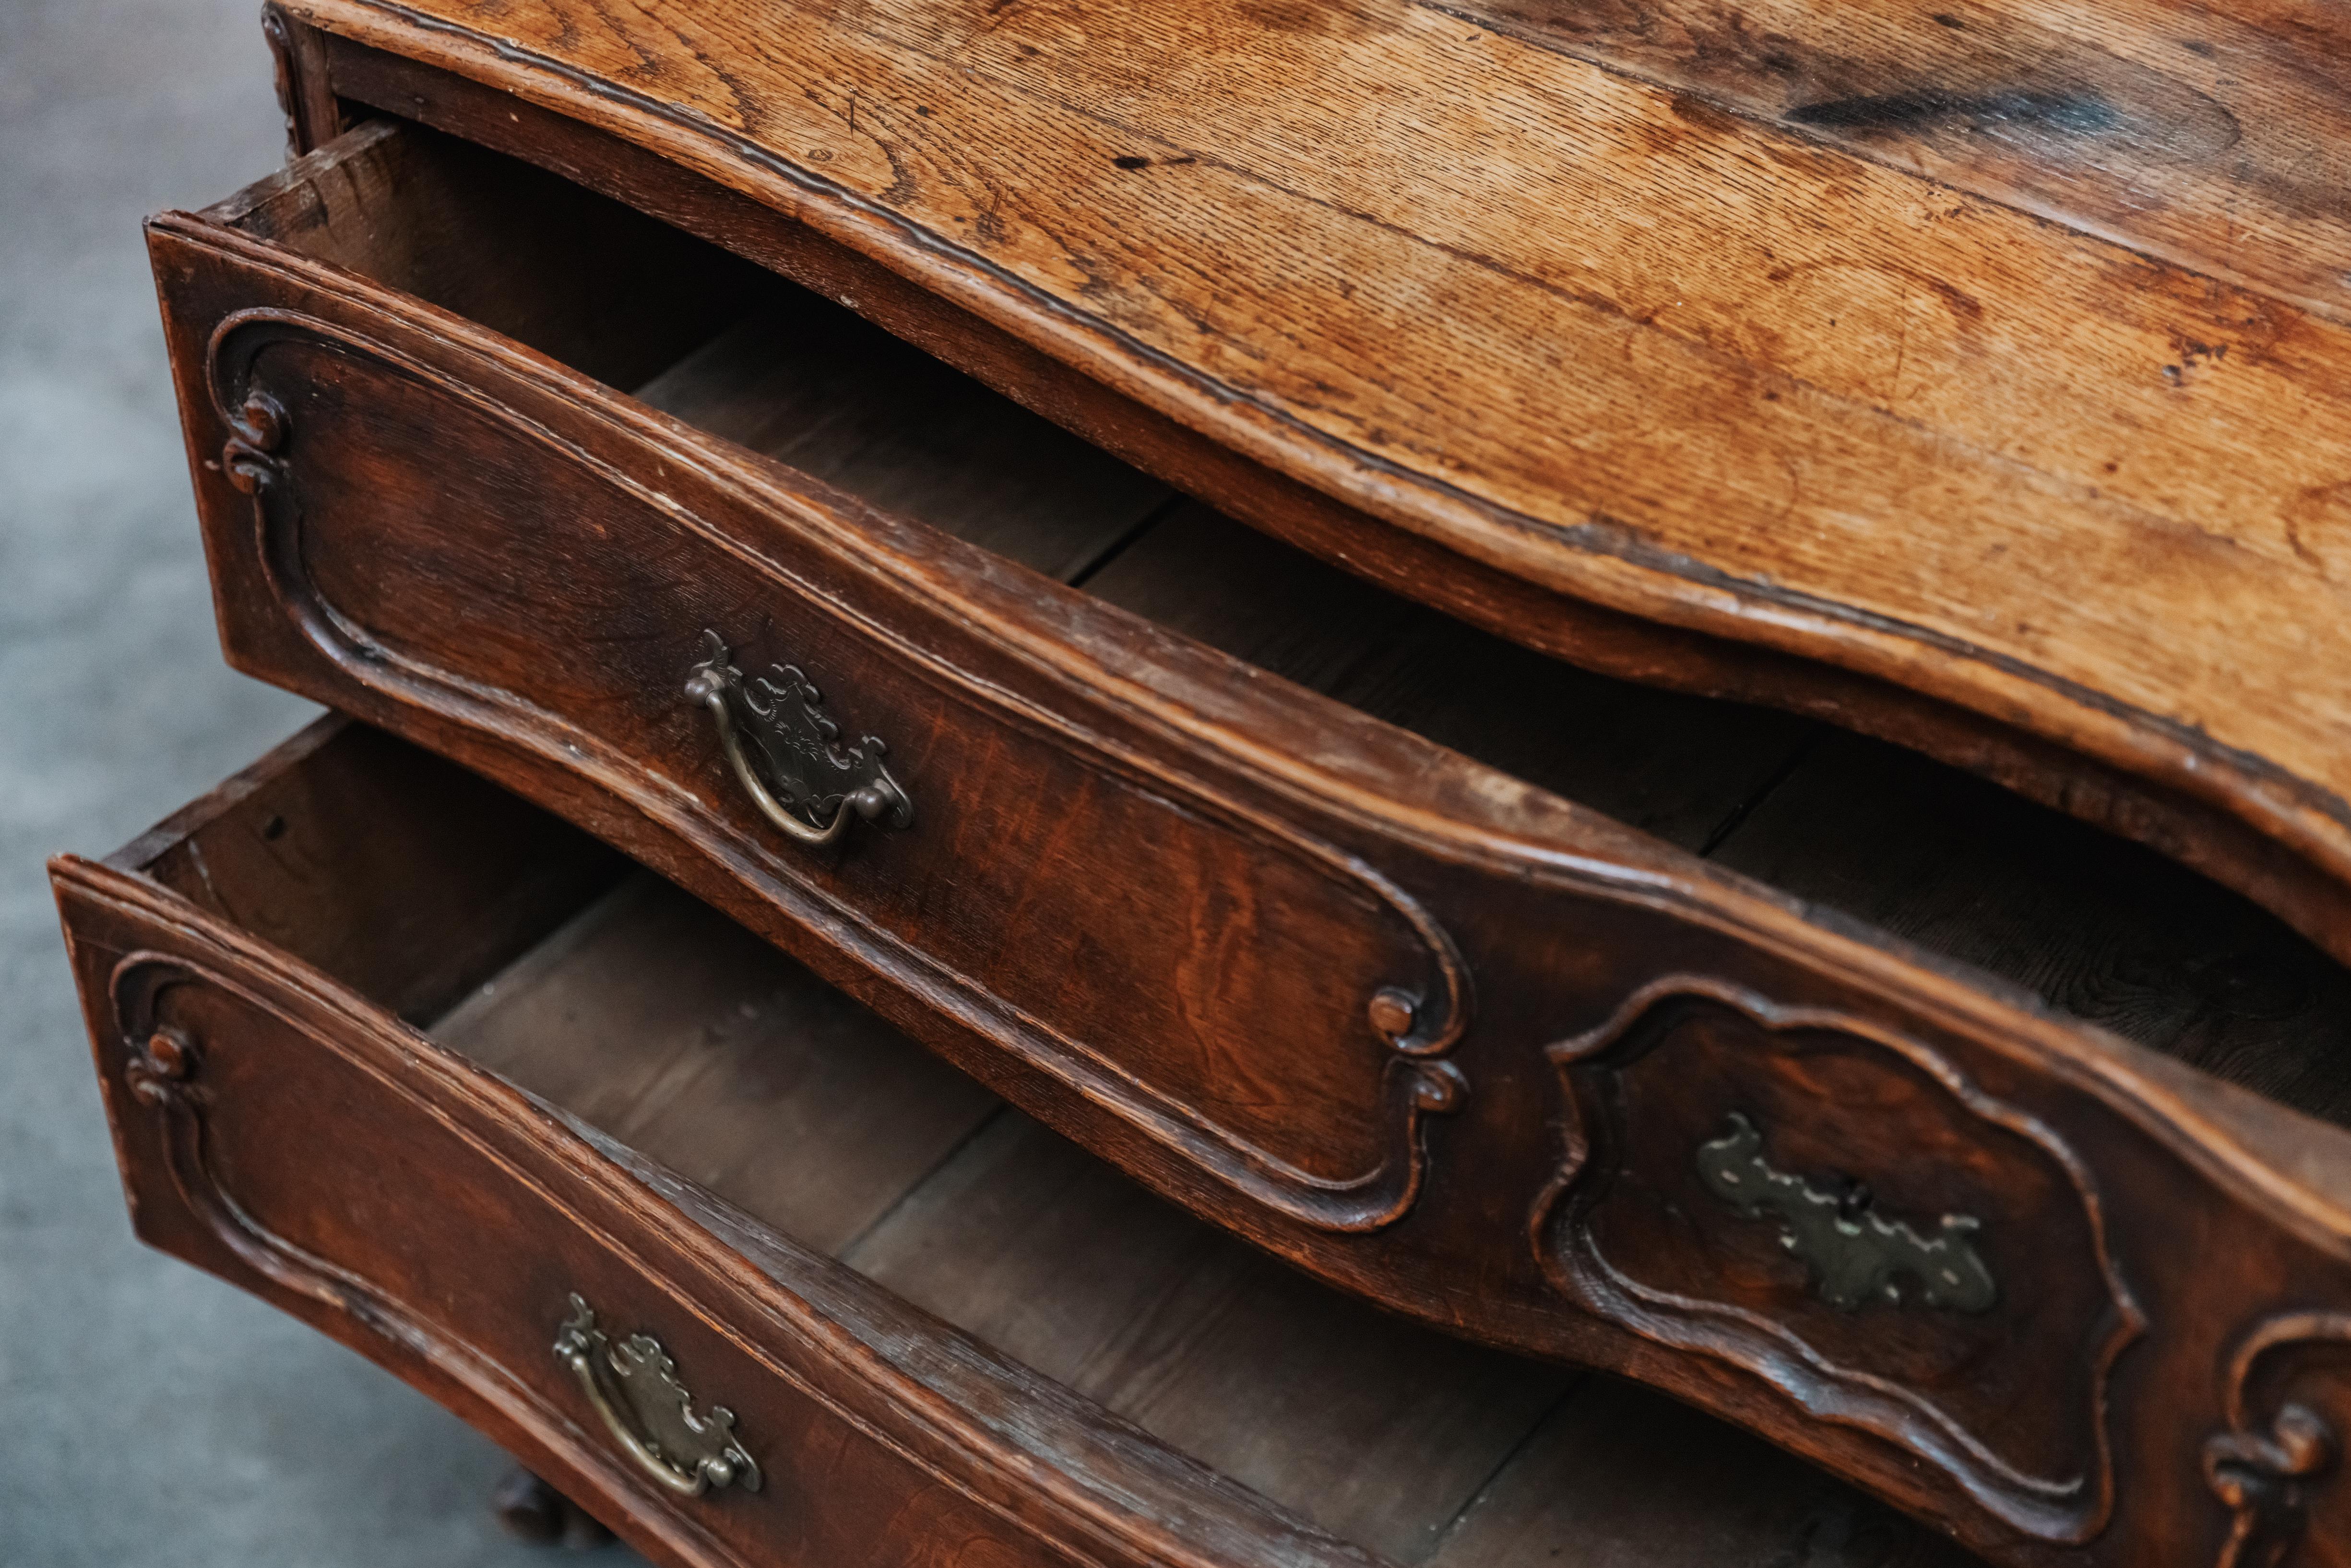 Early Oak Chest Of Drawers Form France, Circa 1800.  Solid oak construction with original hardware.  Great wear and use.